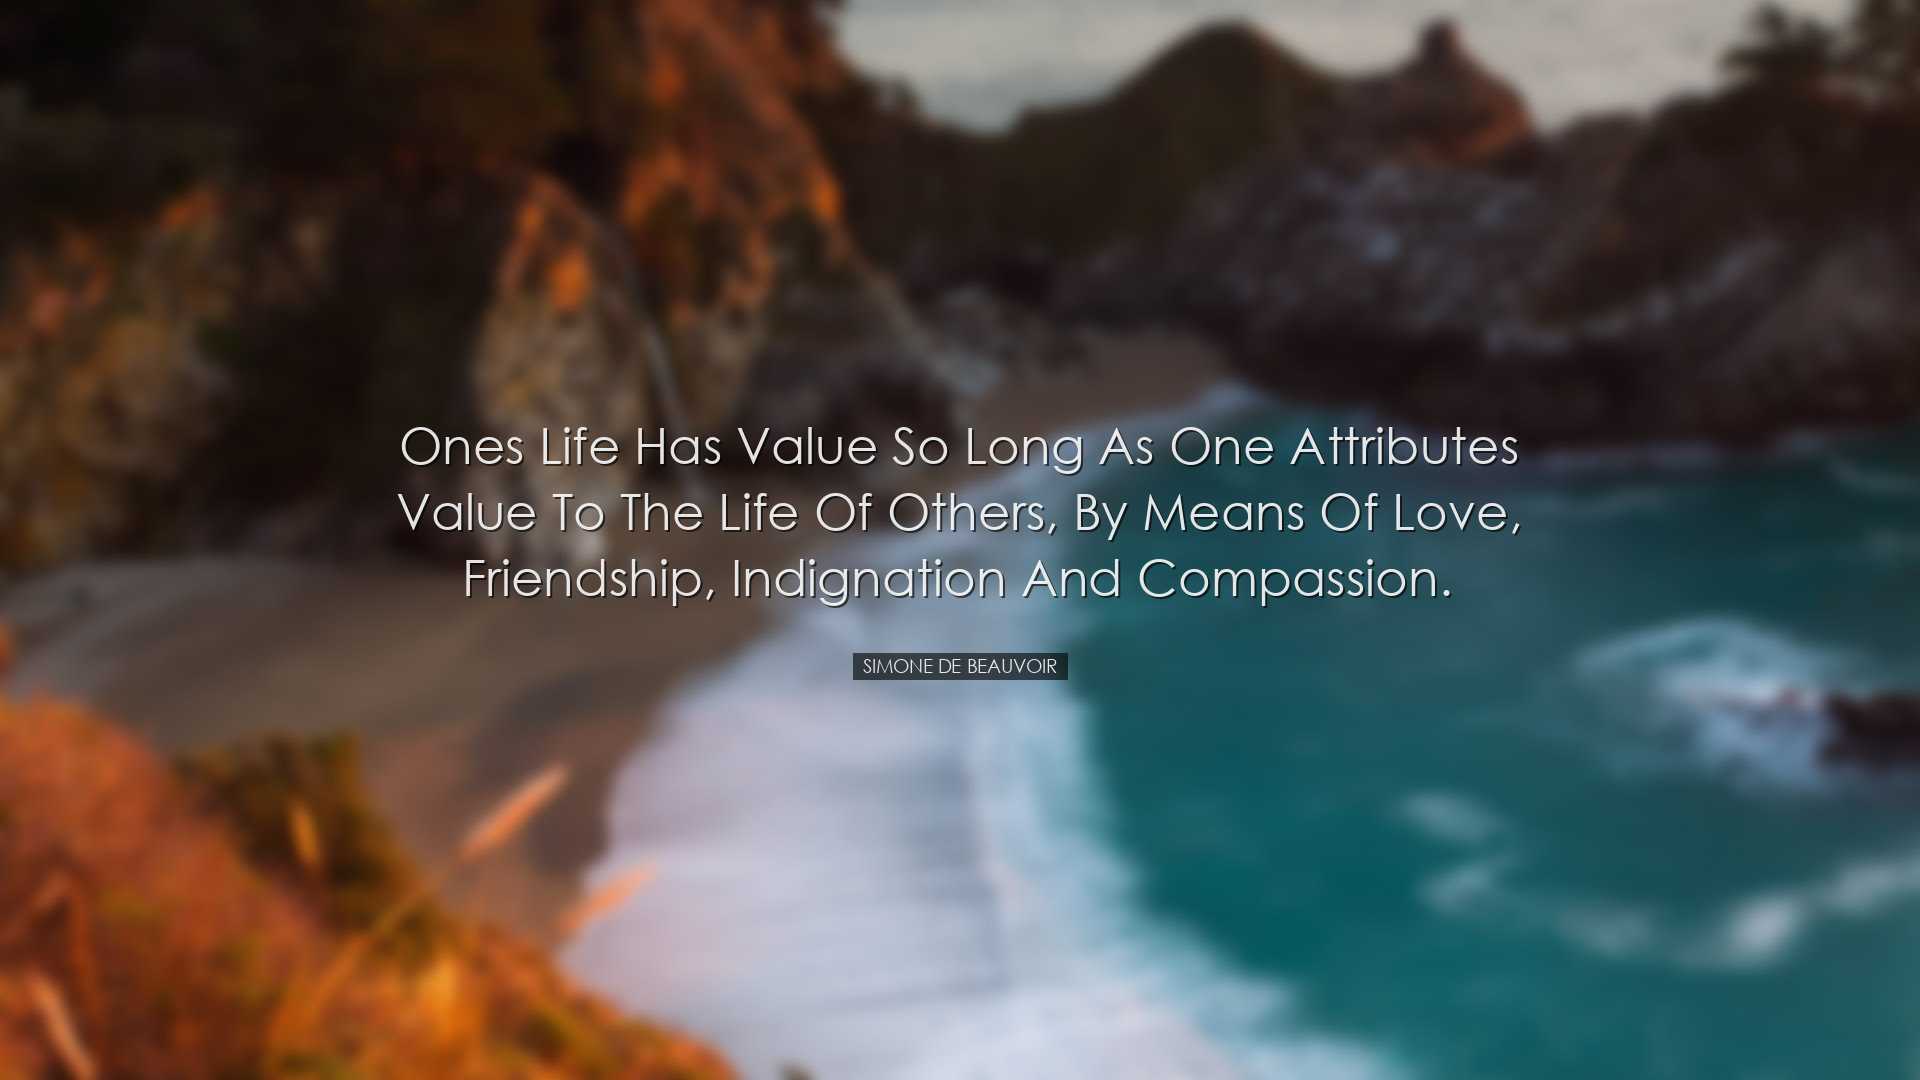 Ones life has value so long as one attributes value to the life of